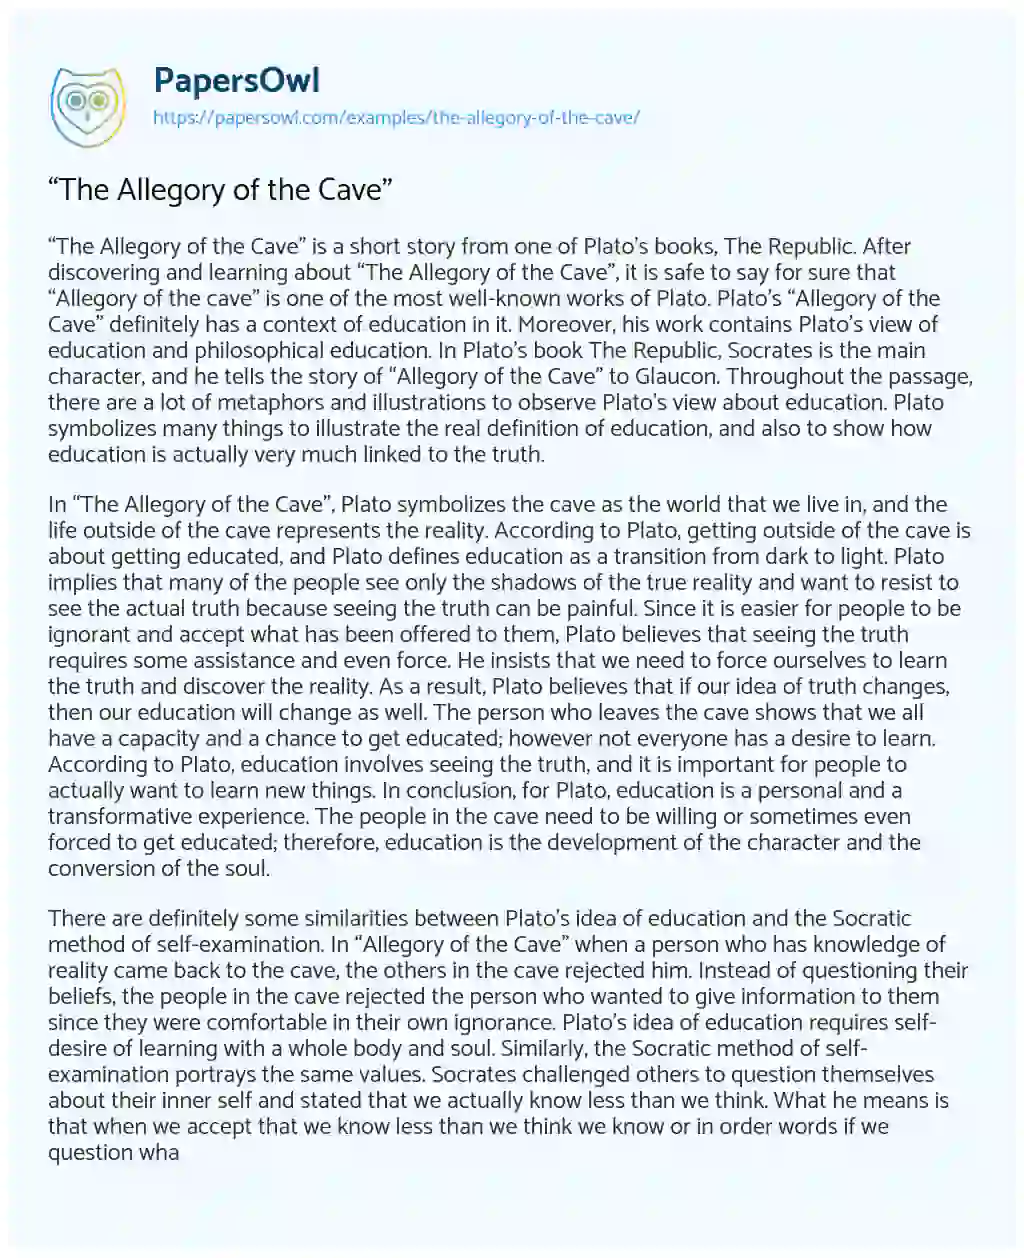 Essay on “The Allegory of the Cave”